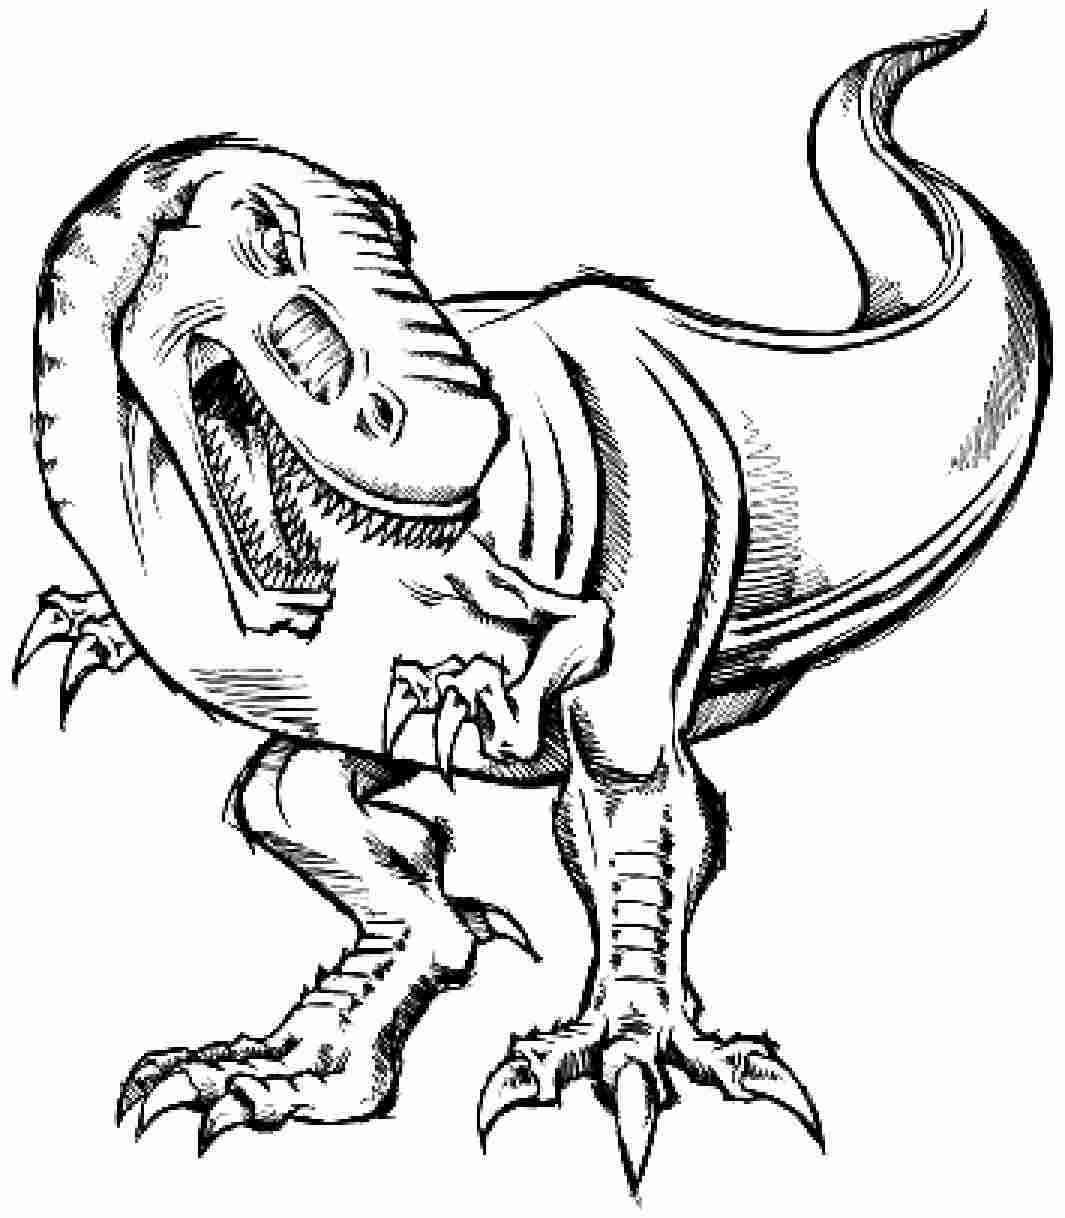 T Rex Dinosaur Coloring Pages At Getcolorings  Free Printable tout Dessin Dino